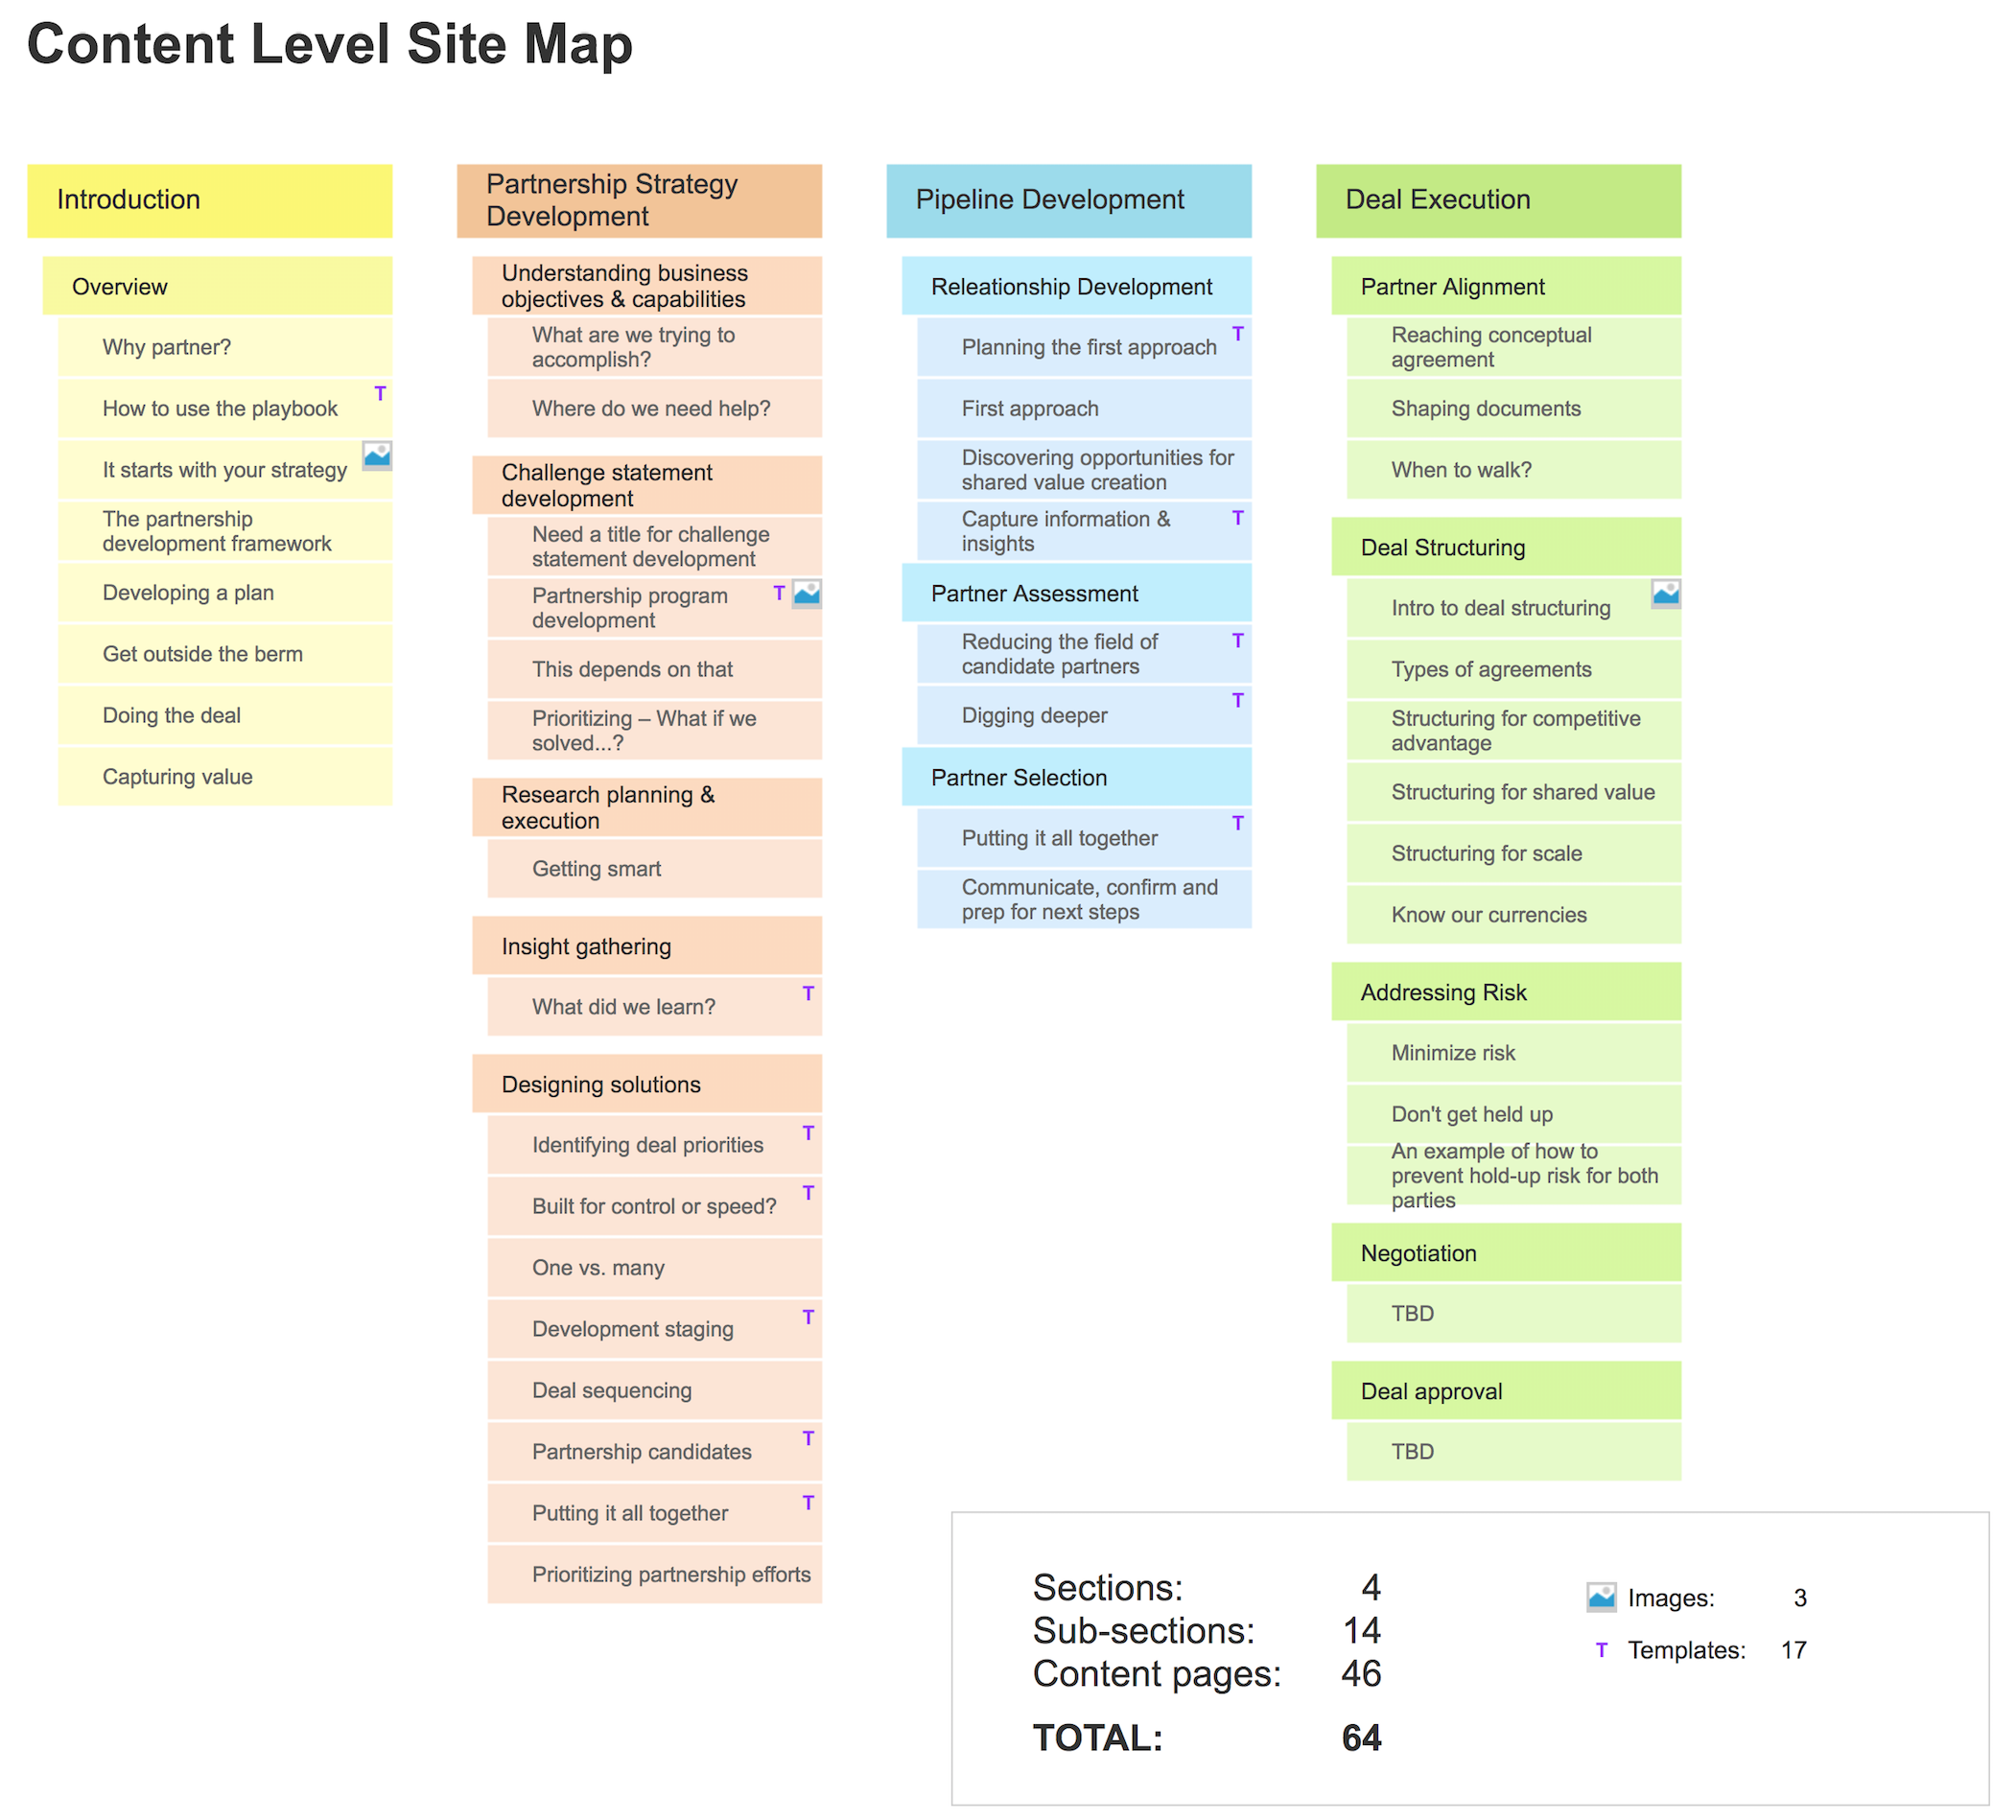 Content Site Map.png